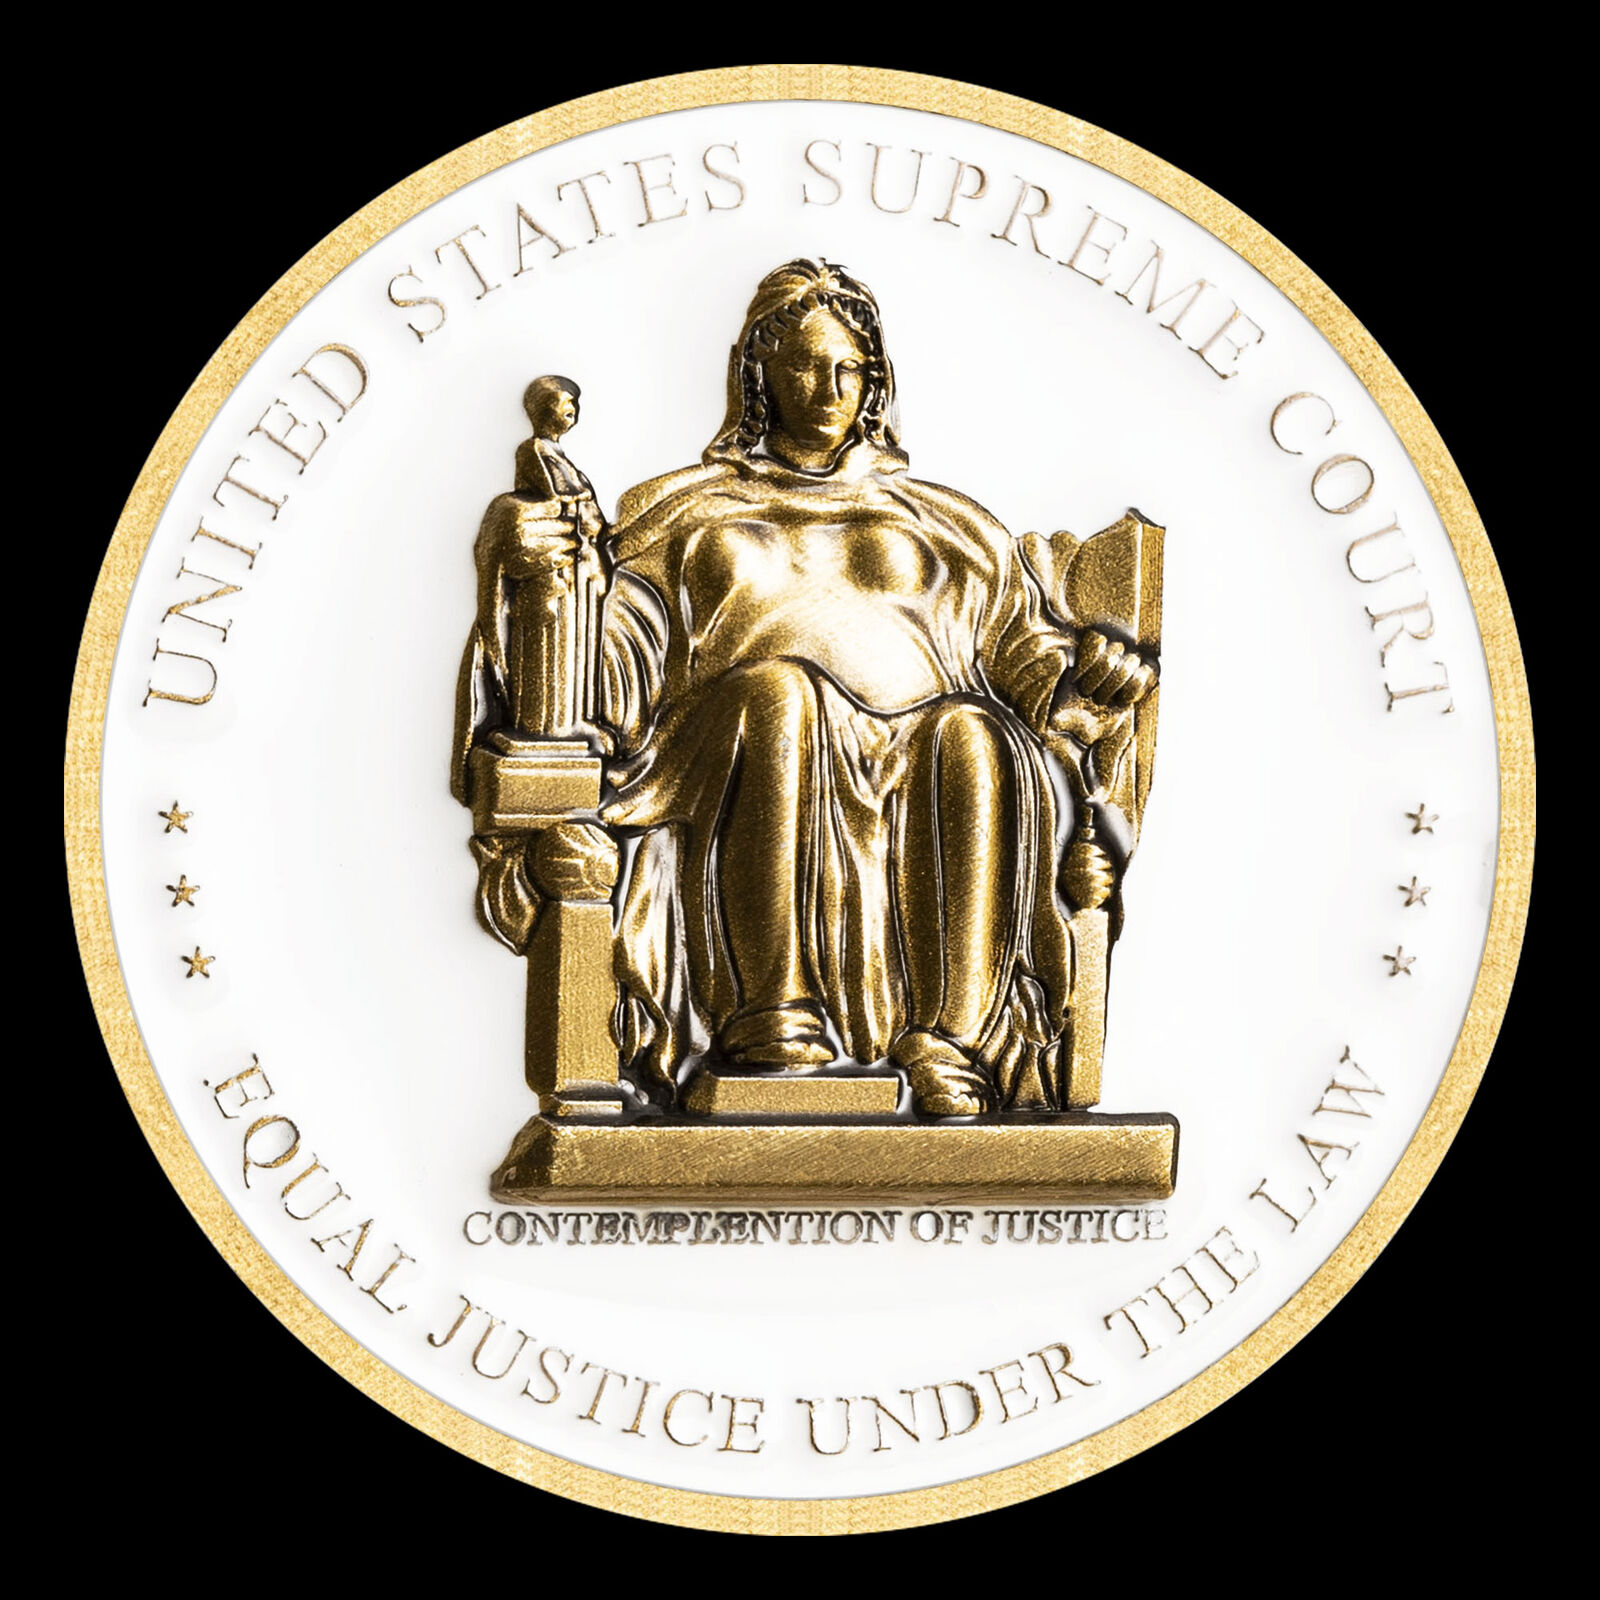 Supreme Court Contemplation of Justice Challenge Coin